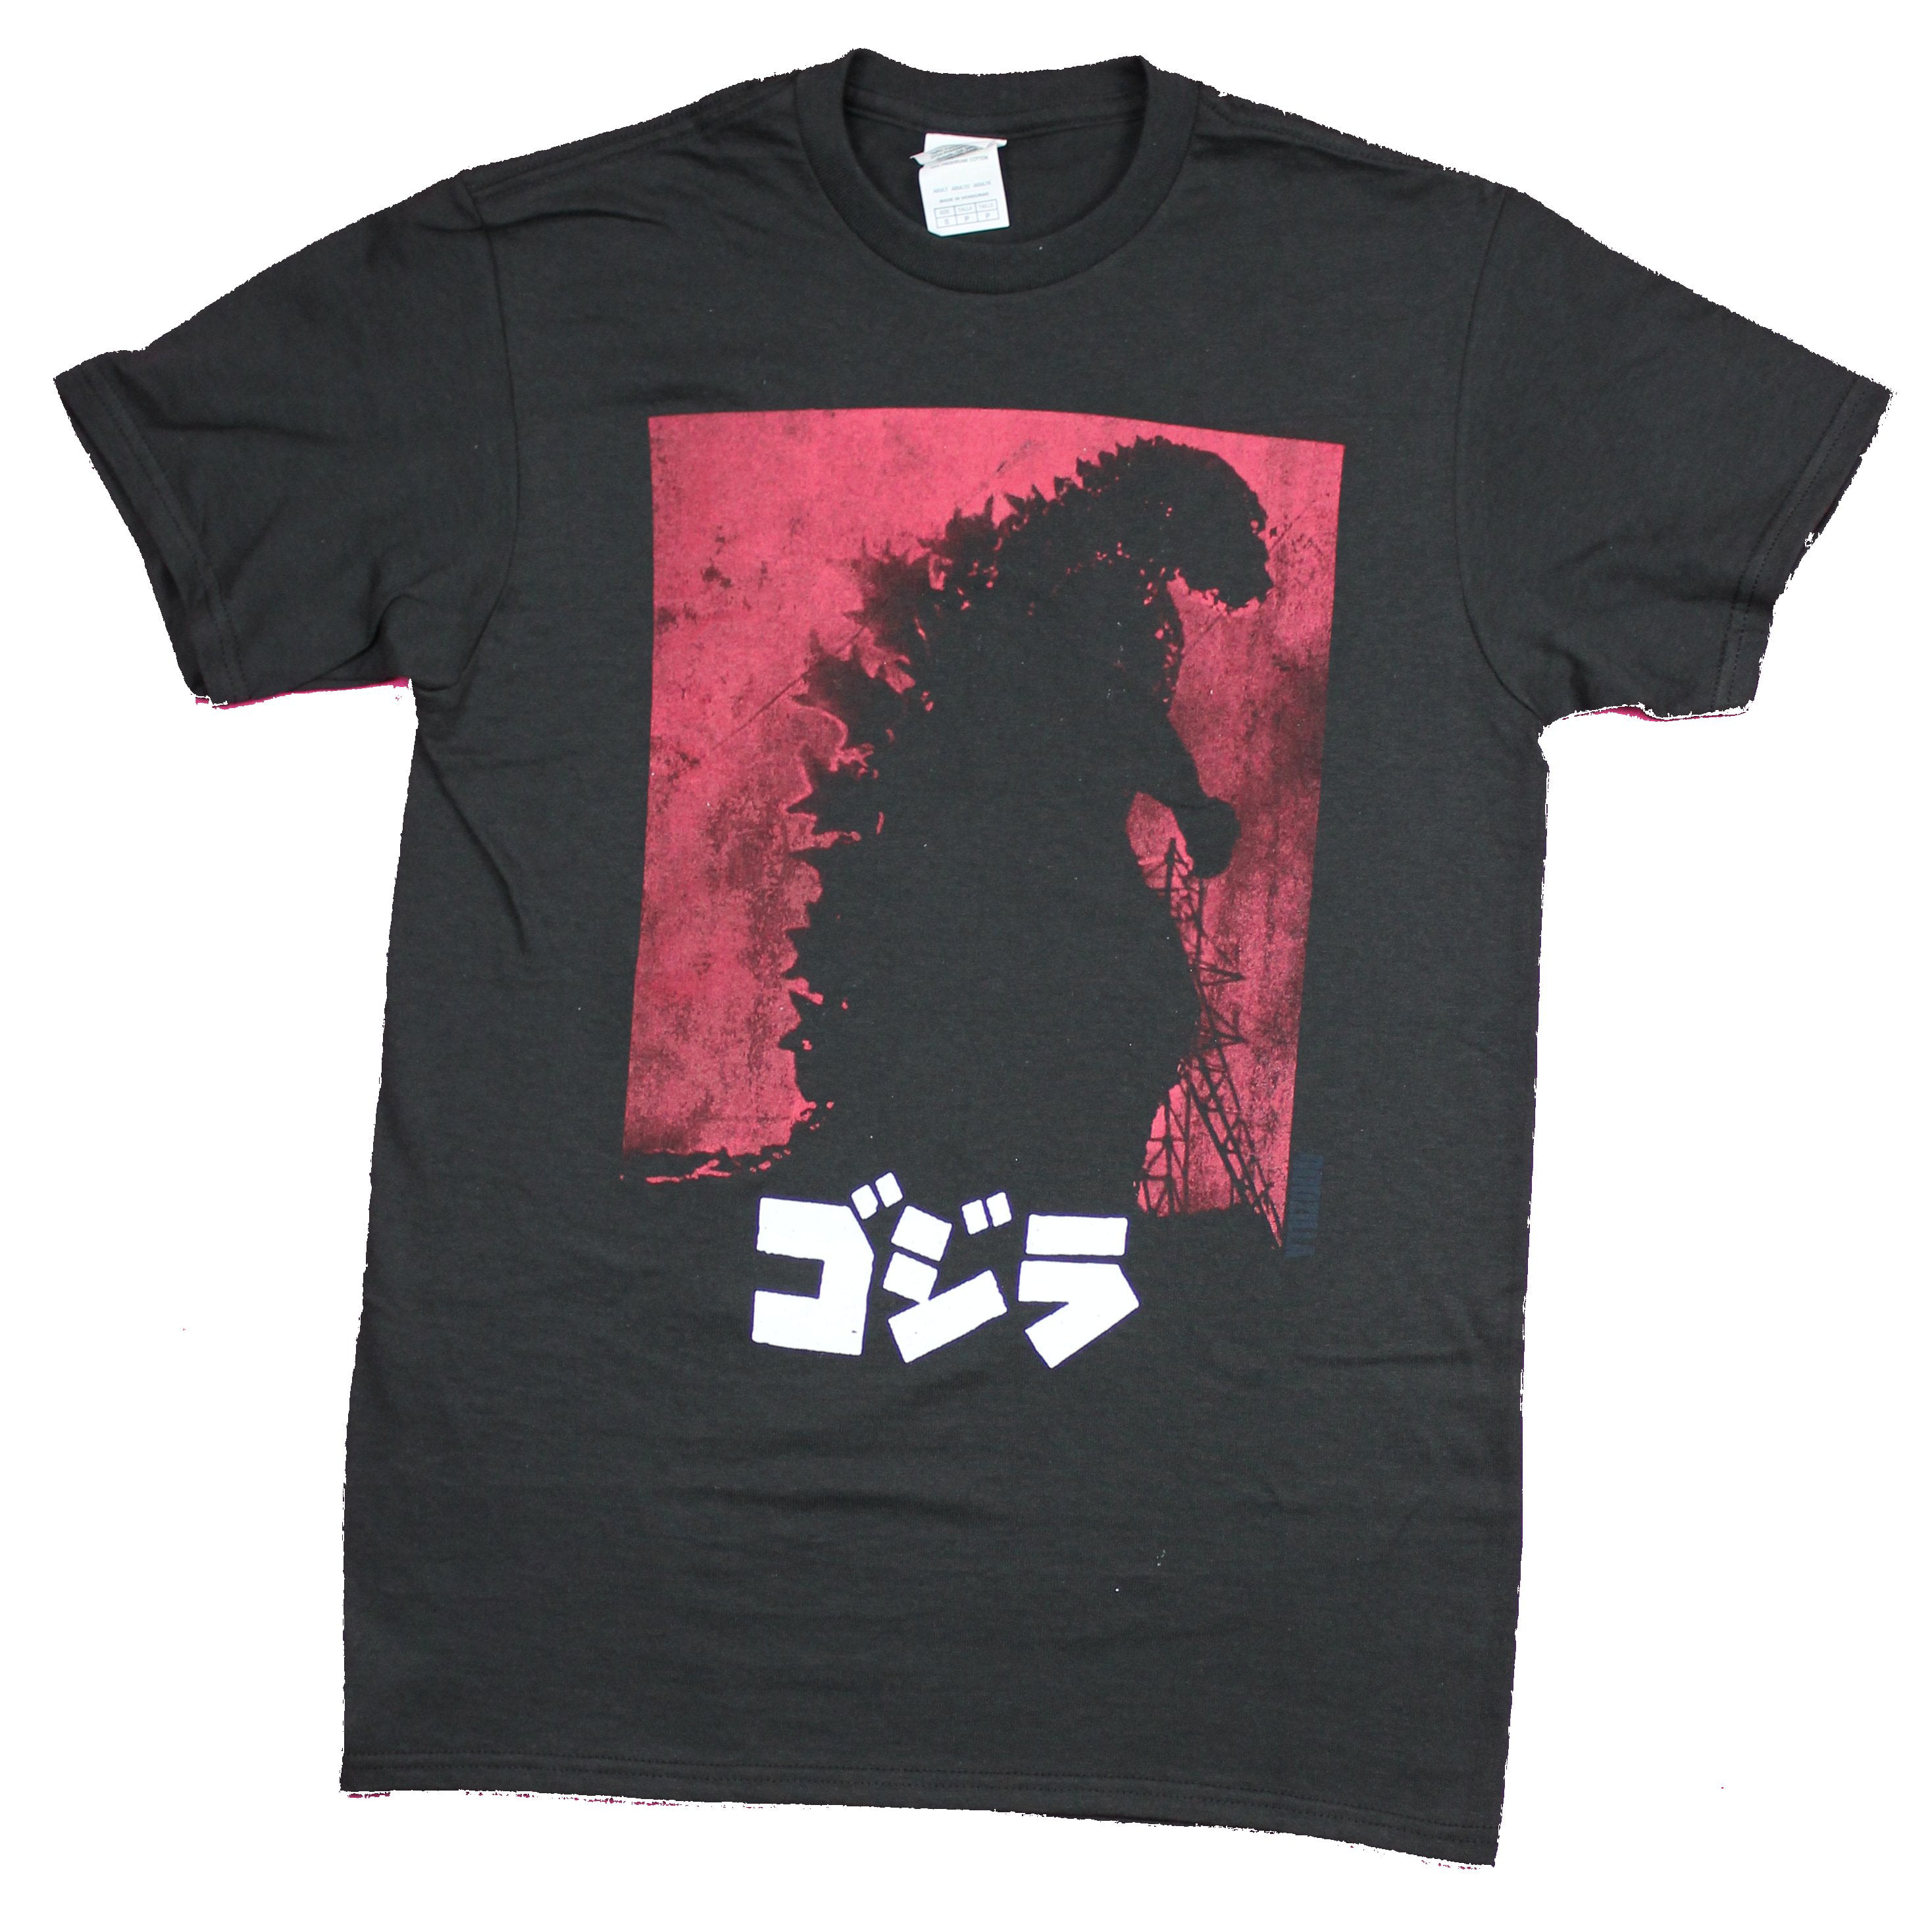 Changes - Godzilla Mens T-Shirt - Black and Red Silhouetted Image Over ...